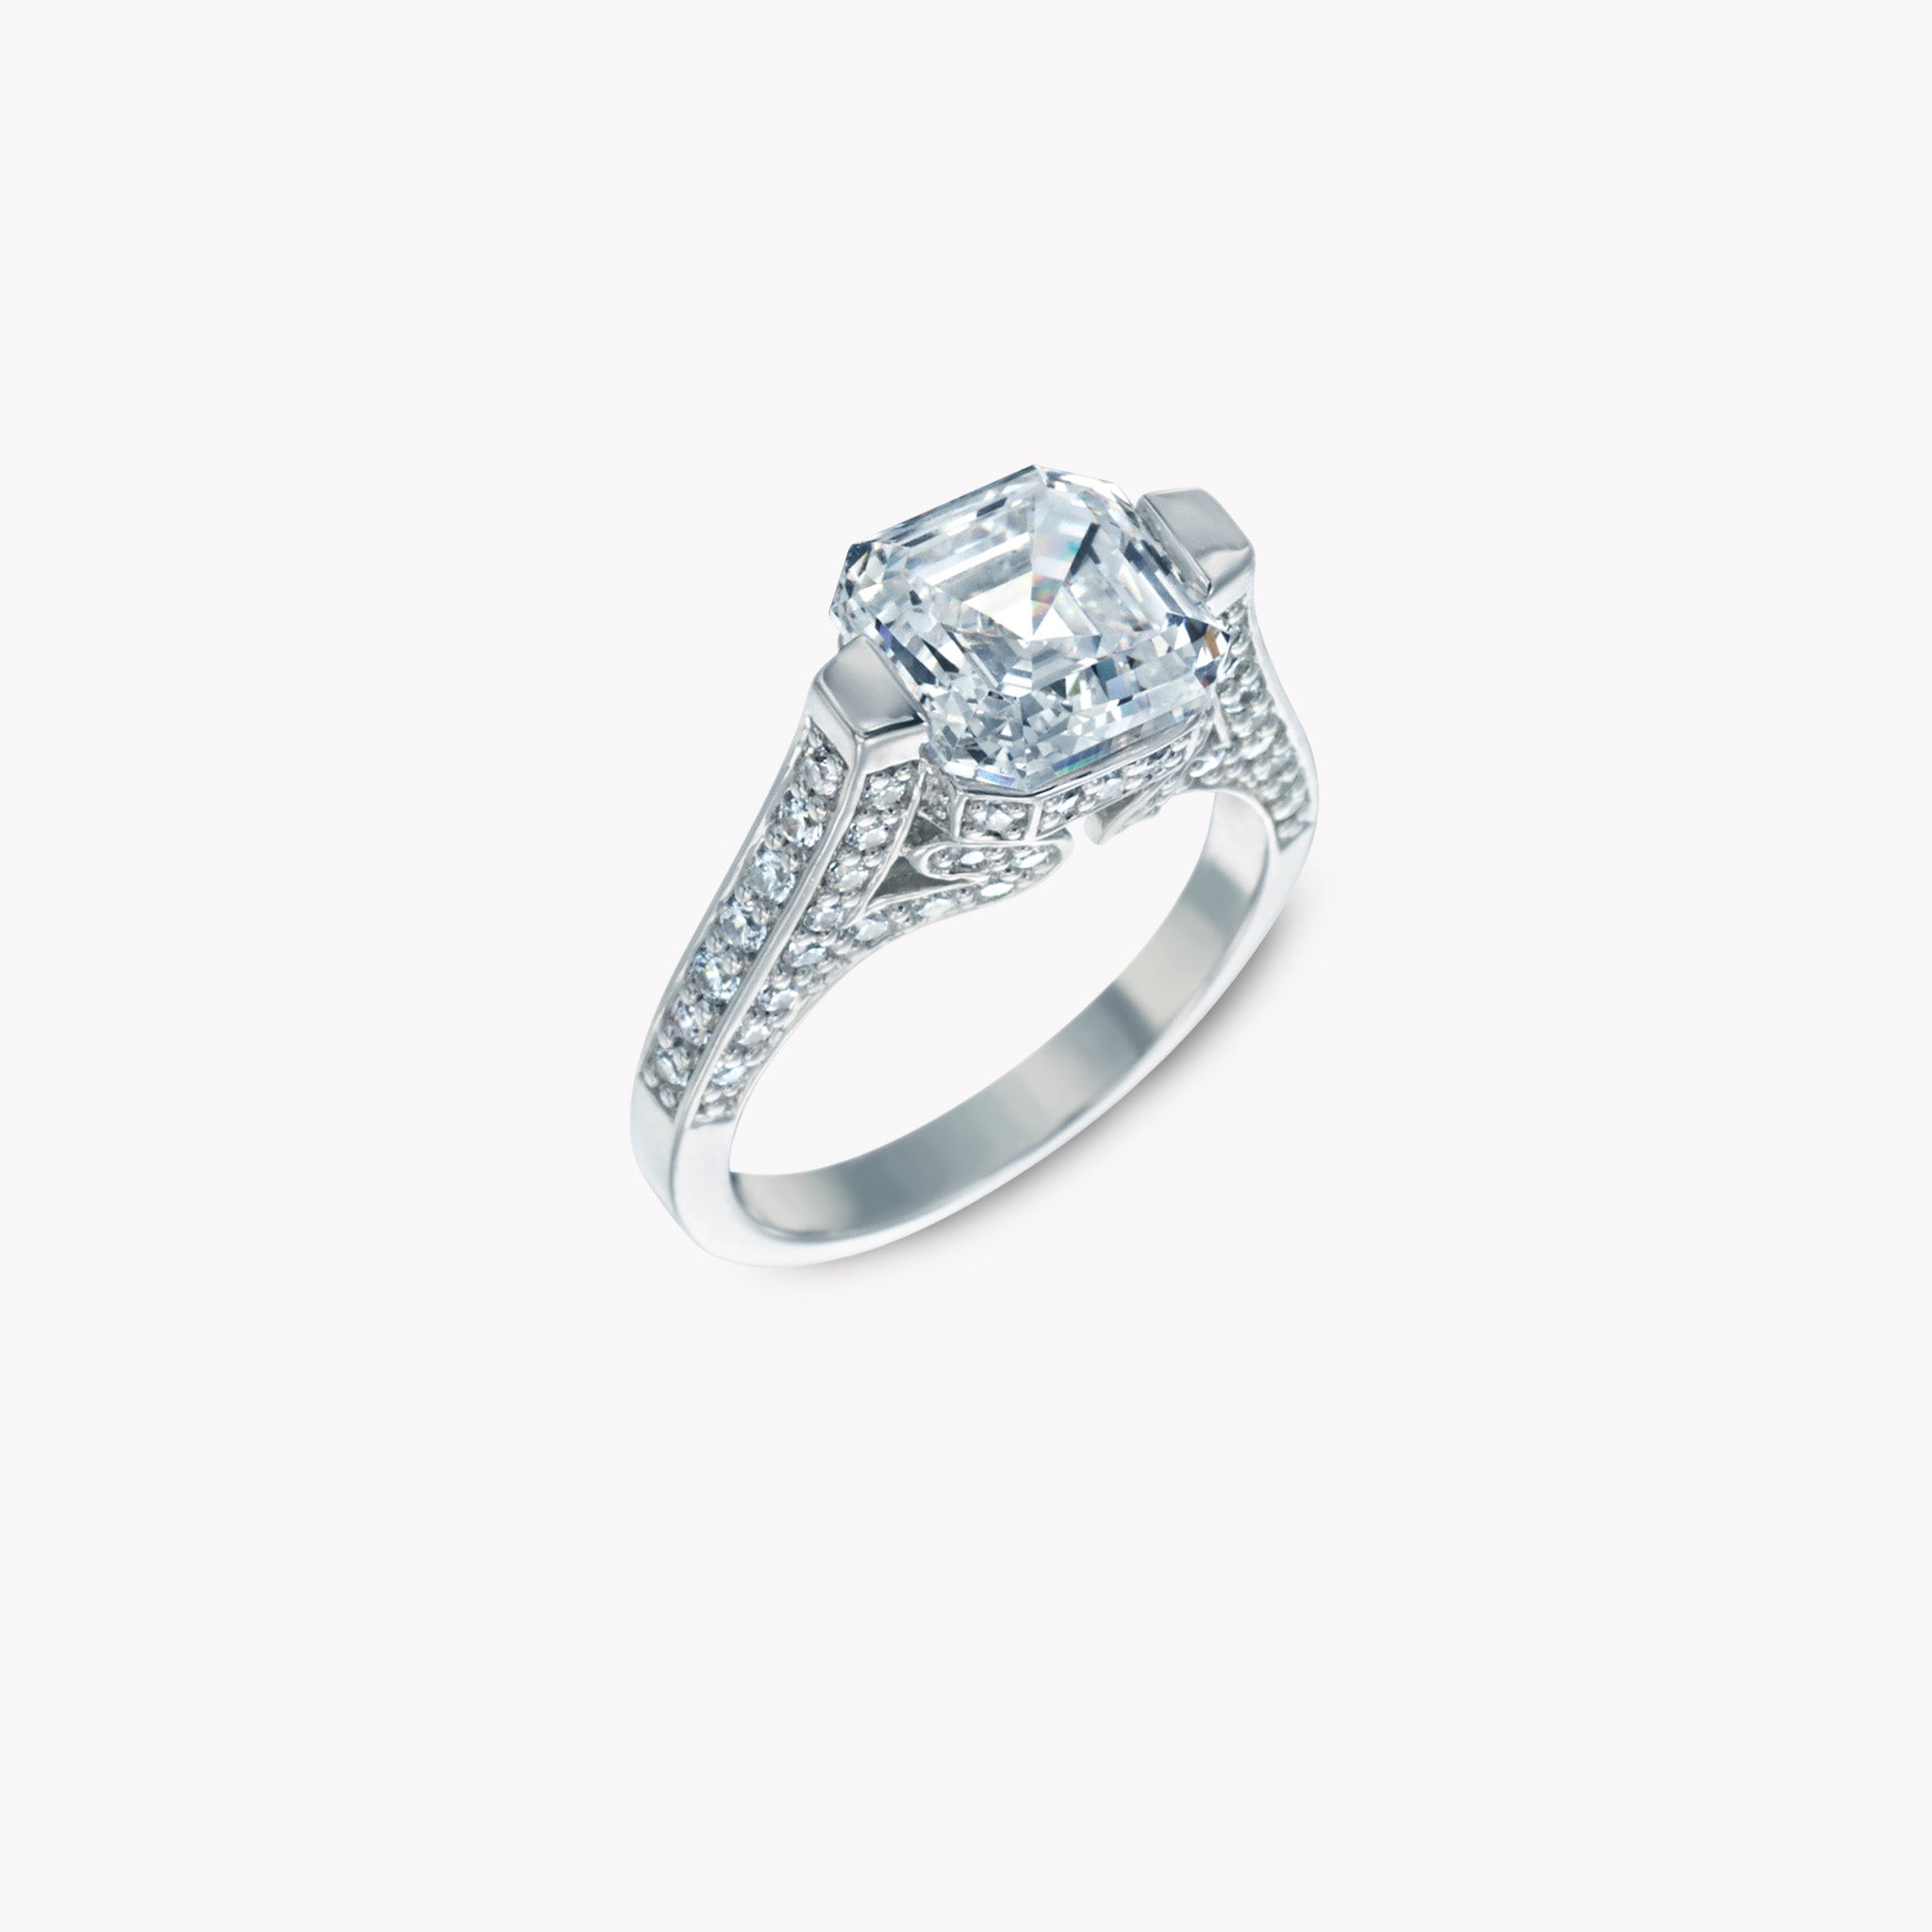 DANI 'Regal' Ring with Pave